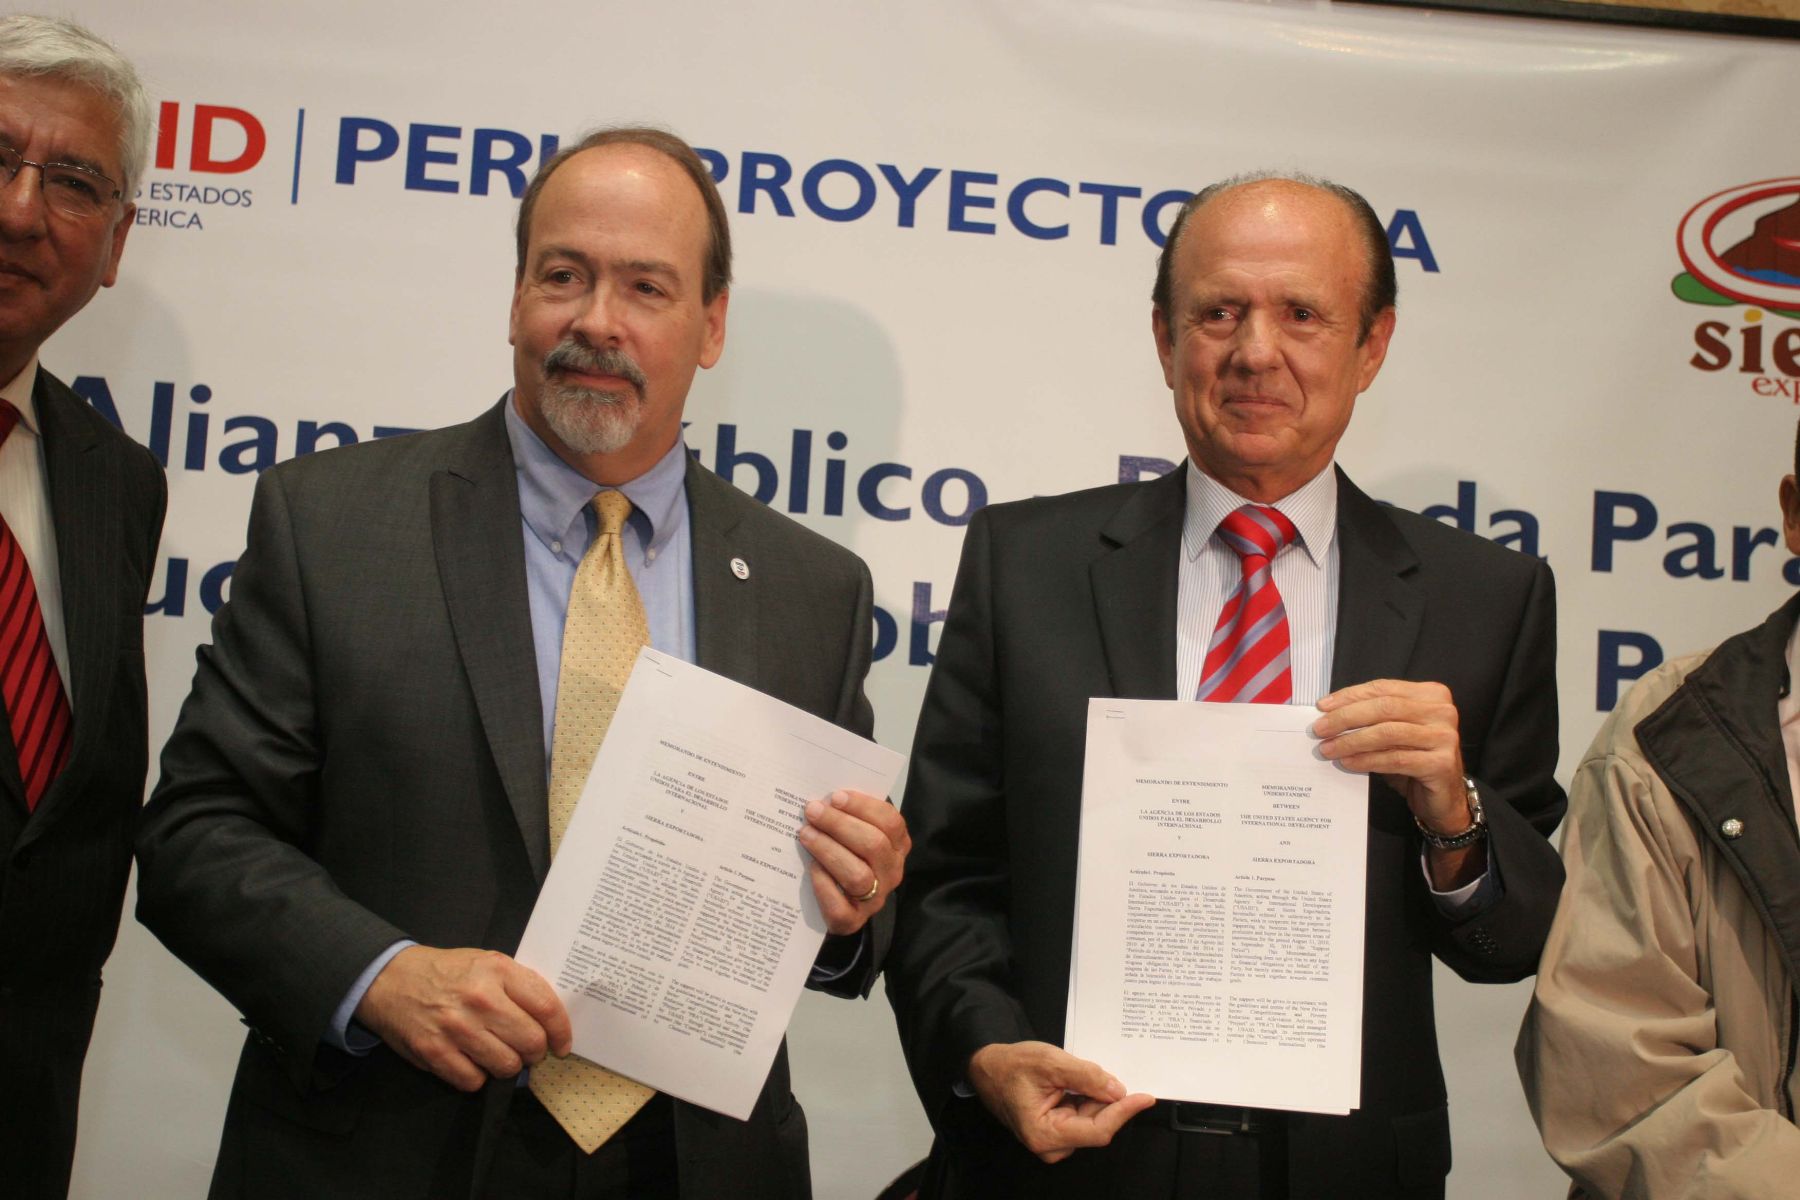 USAID-Peru and Sierra Exportadora signed a financing agreement for the second phase of the Poverty Reduction and Alleviation (PRA) project.